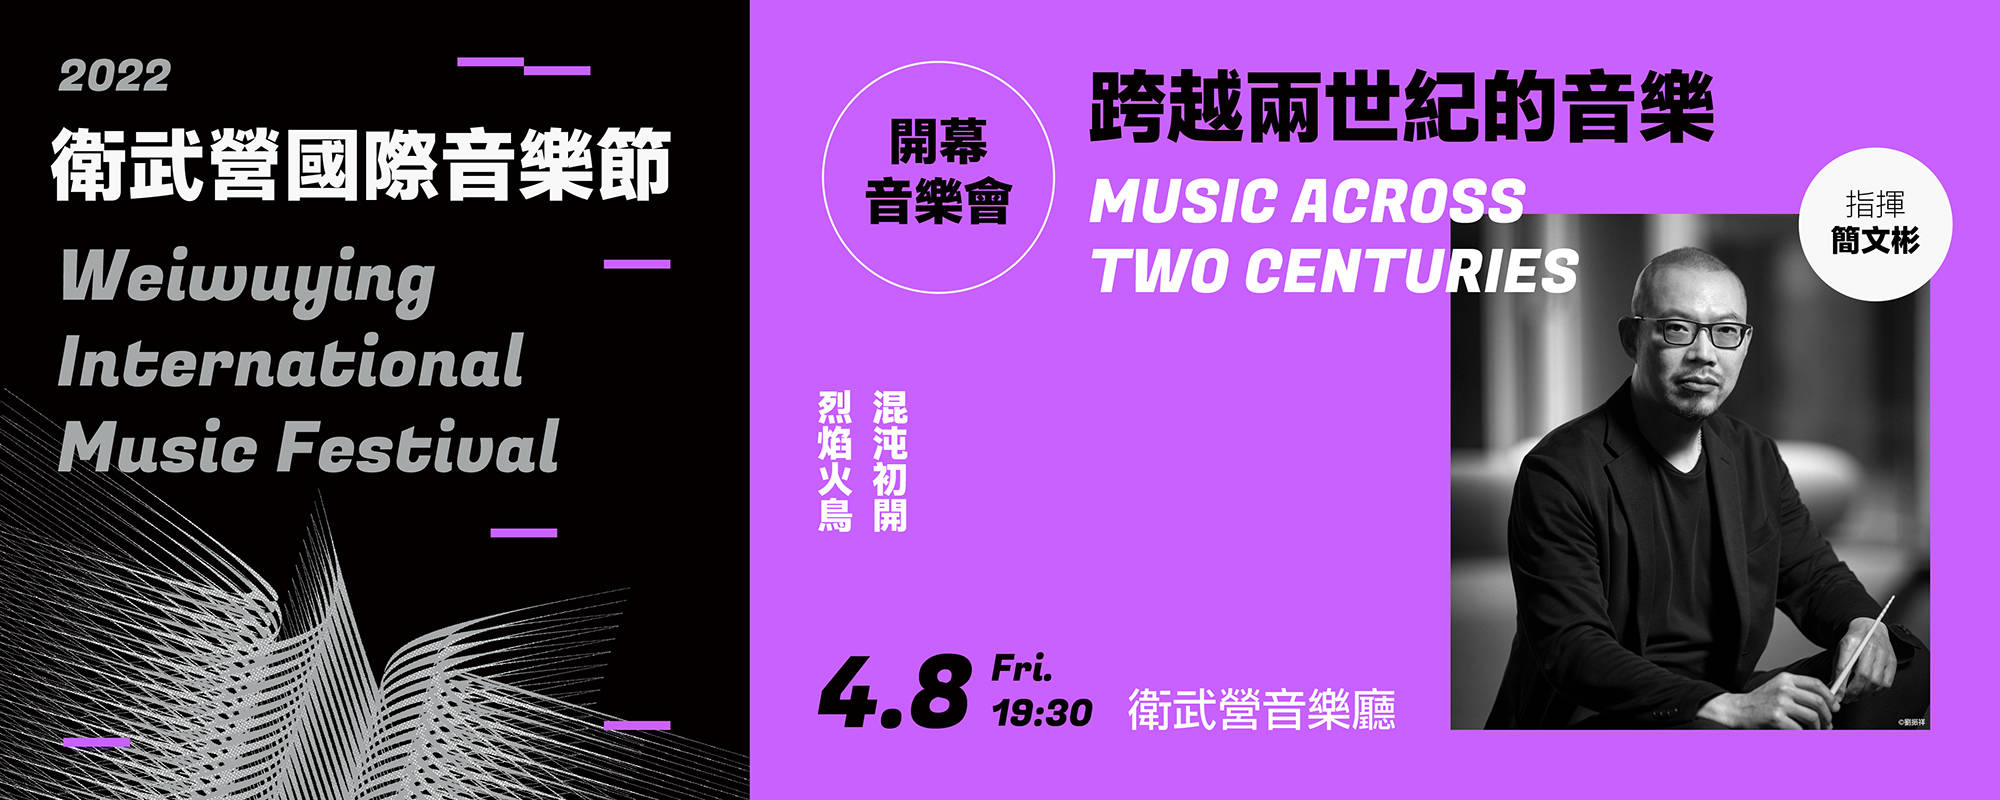 【2022 Weiwuying International Music Festival】Opening Concert - Music Across Two Centuries